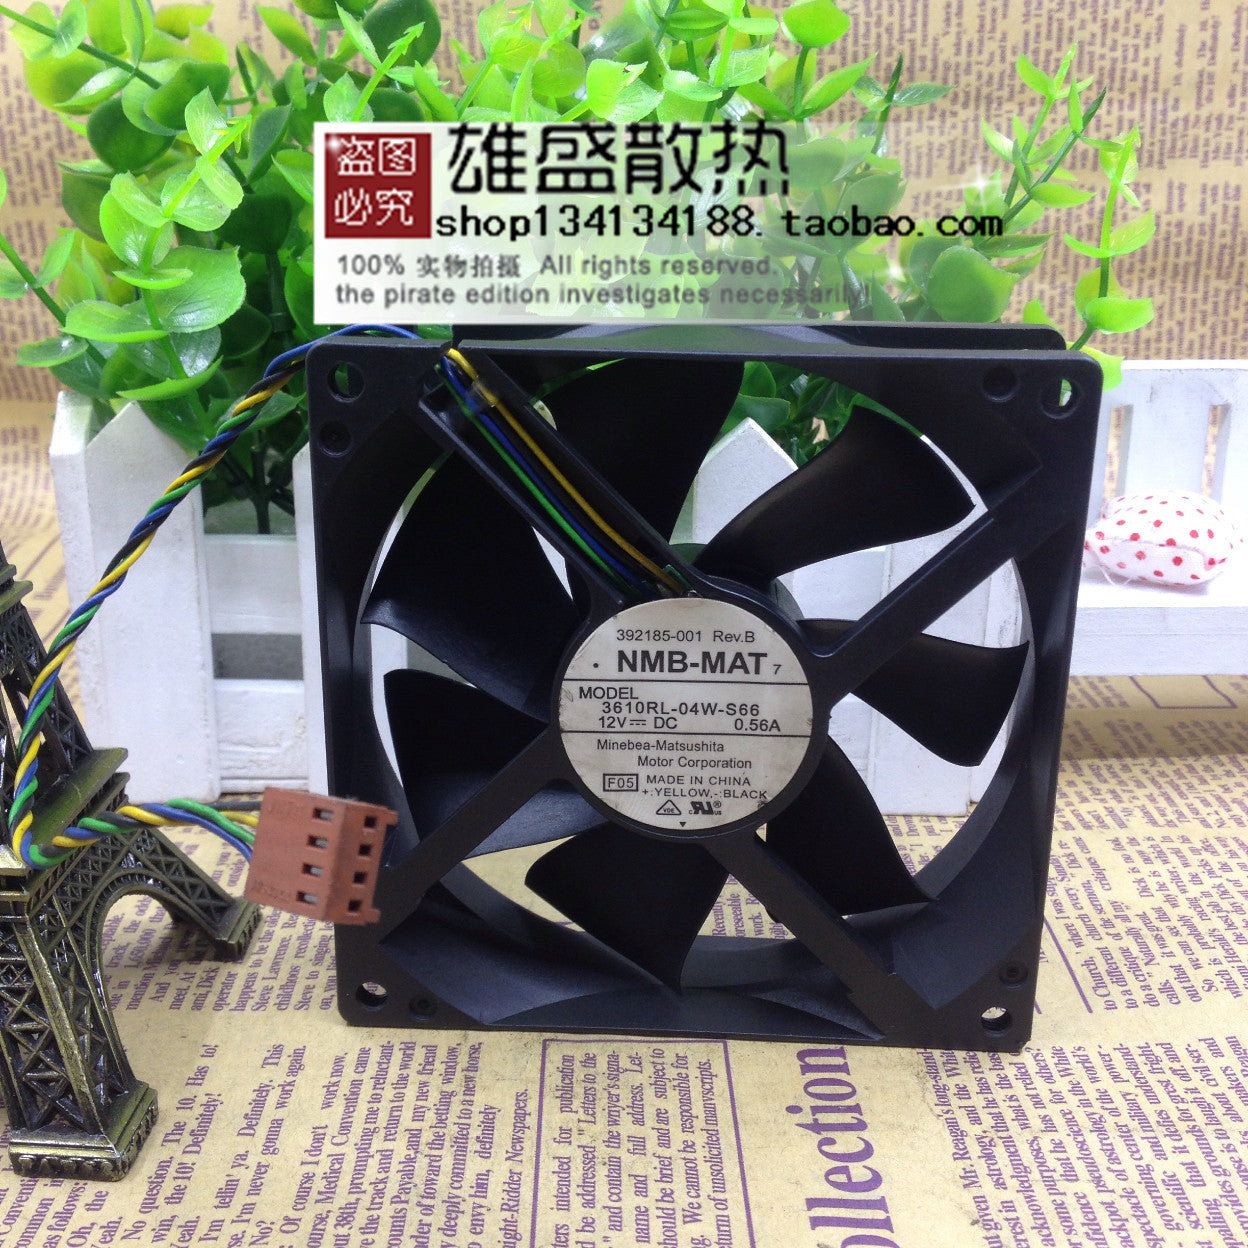 Then 3610RL-04W-S66 9cm 9025 12V0.56A 4-Wire Temperature Chassis Cooling Fan